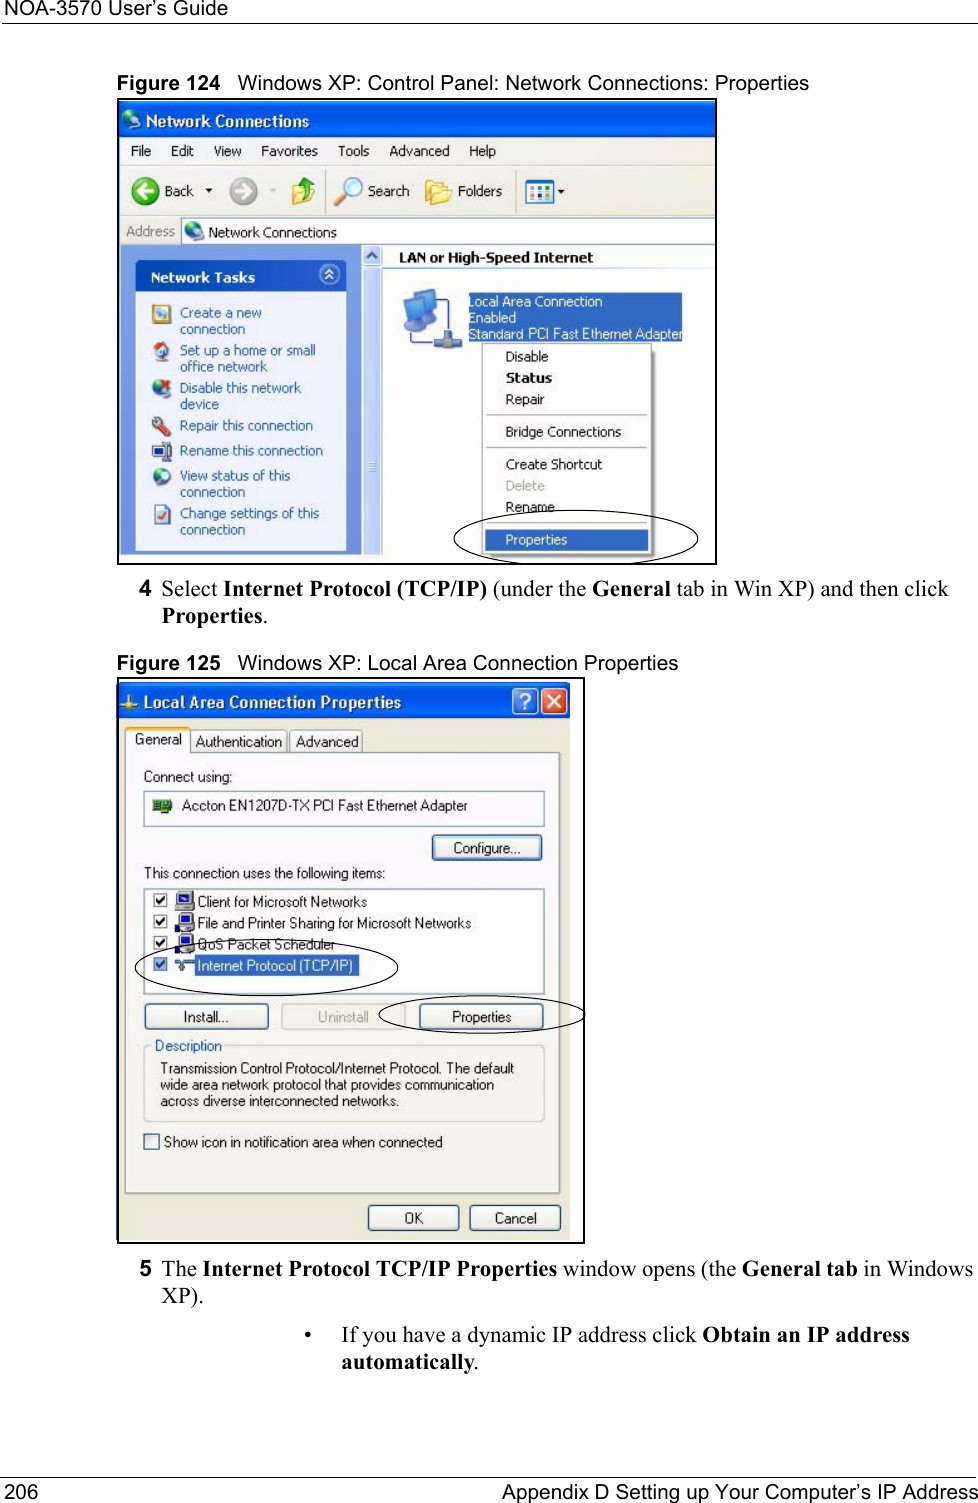 NOA-3570 User’s Guide206 Appendix D Setting up Your Computer’s IP AddressFigure 124   Windows XP: Control Panel: Network Connections: Properties4Select Internet Protocol (TCP/IP) (under the General tab in Win XP) and then click Properties.Figure 125   Windows XP: Local Area Connection Properties5The Internet Protocol TCP/IP Properties window opens (the General tab in Windows XP).• If you have a dynamic IP address click Obtain an IP address automatically.